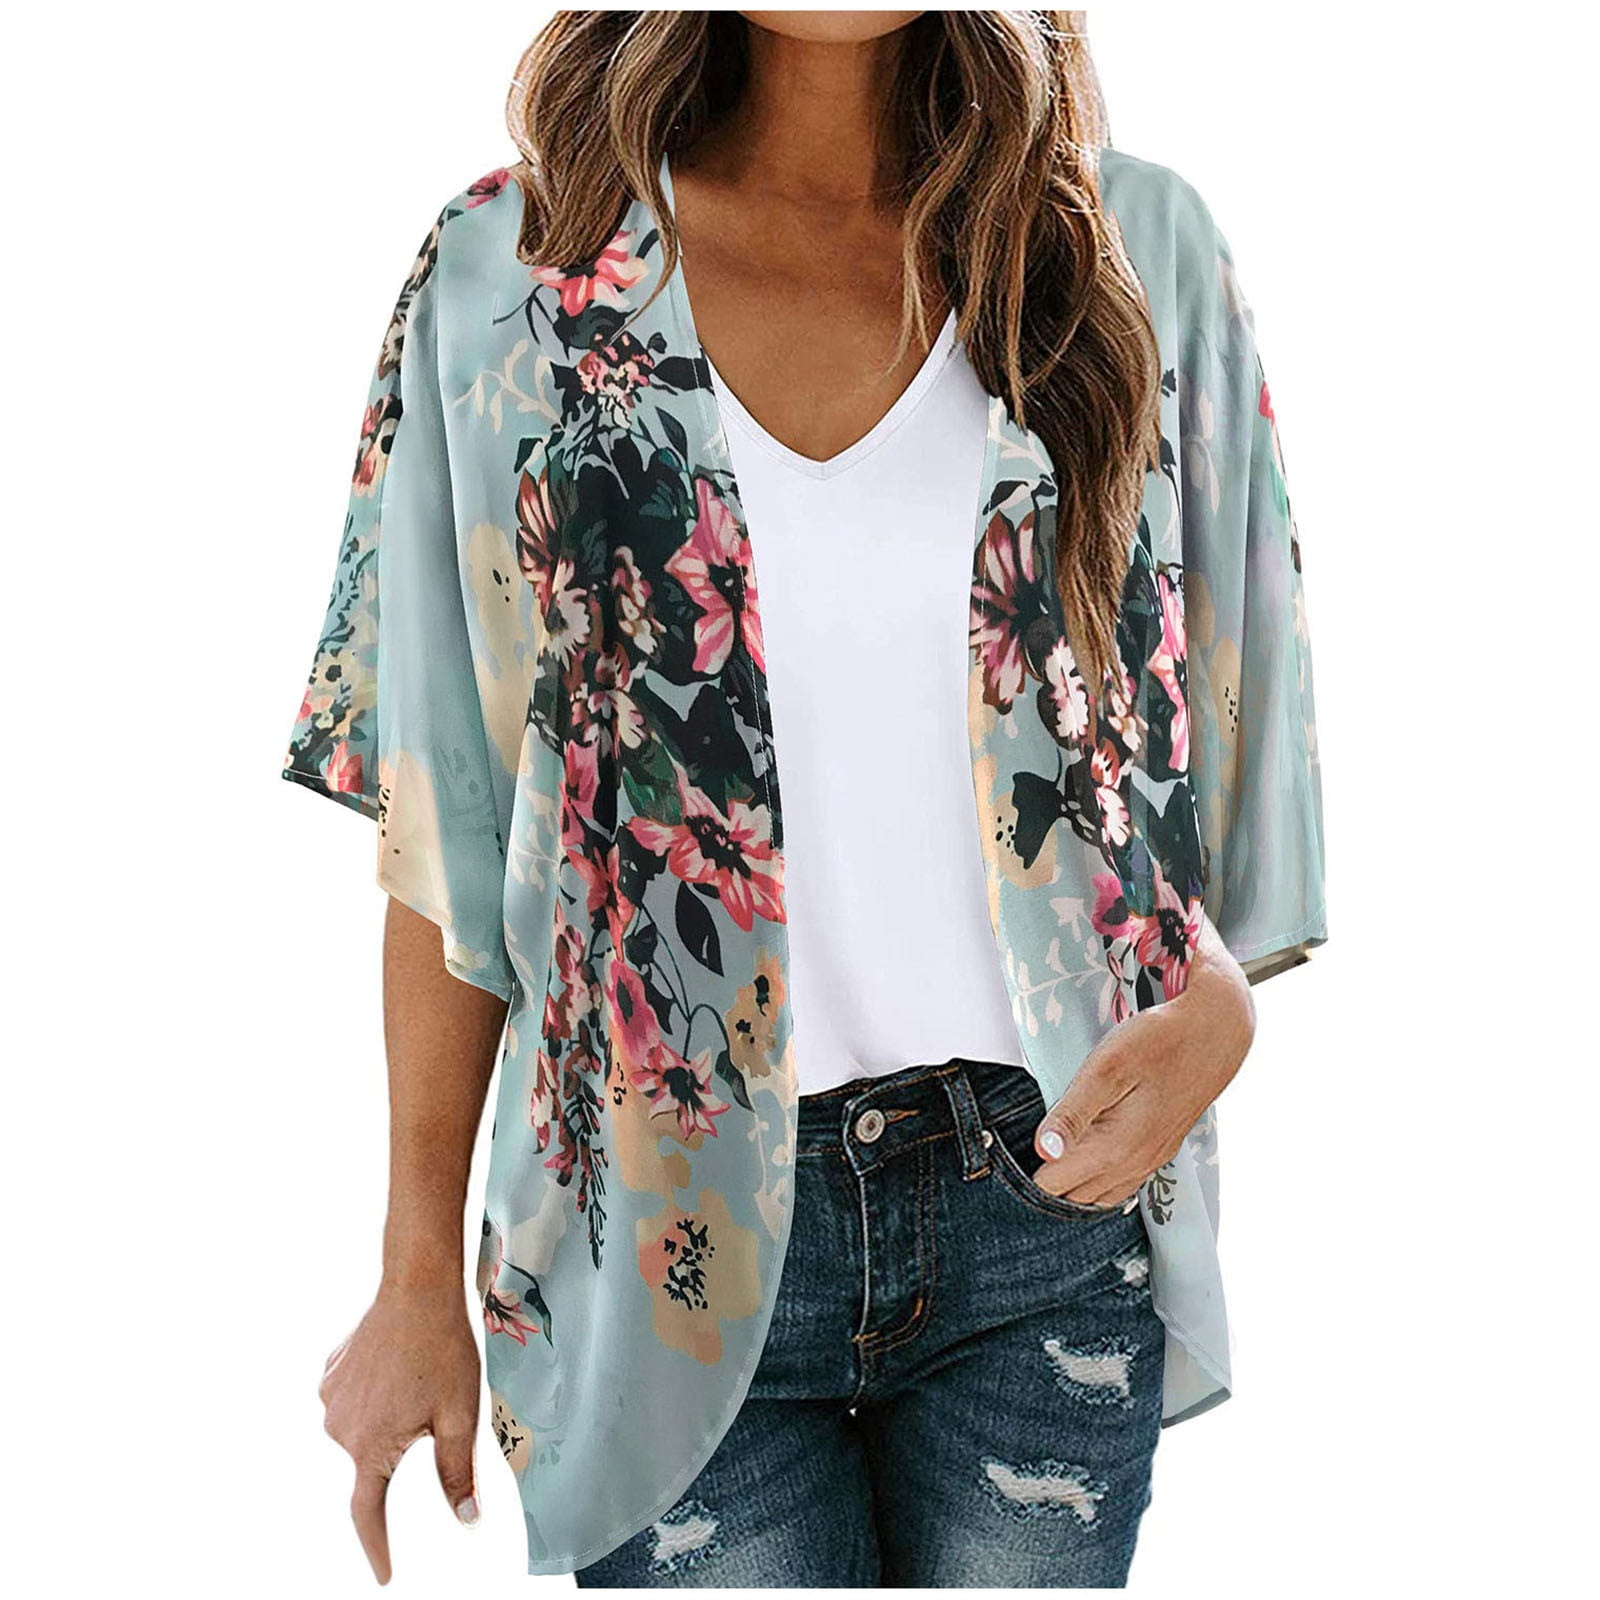 Chiffon Kimono Cardigan for Women Half Bell Sleeve Loose Beach Lightweight  Floral Print Cover Up Blouse Tops (X-Large, Red) 